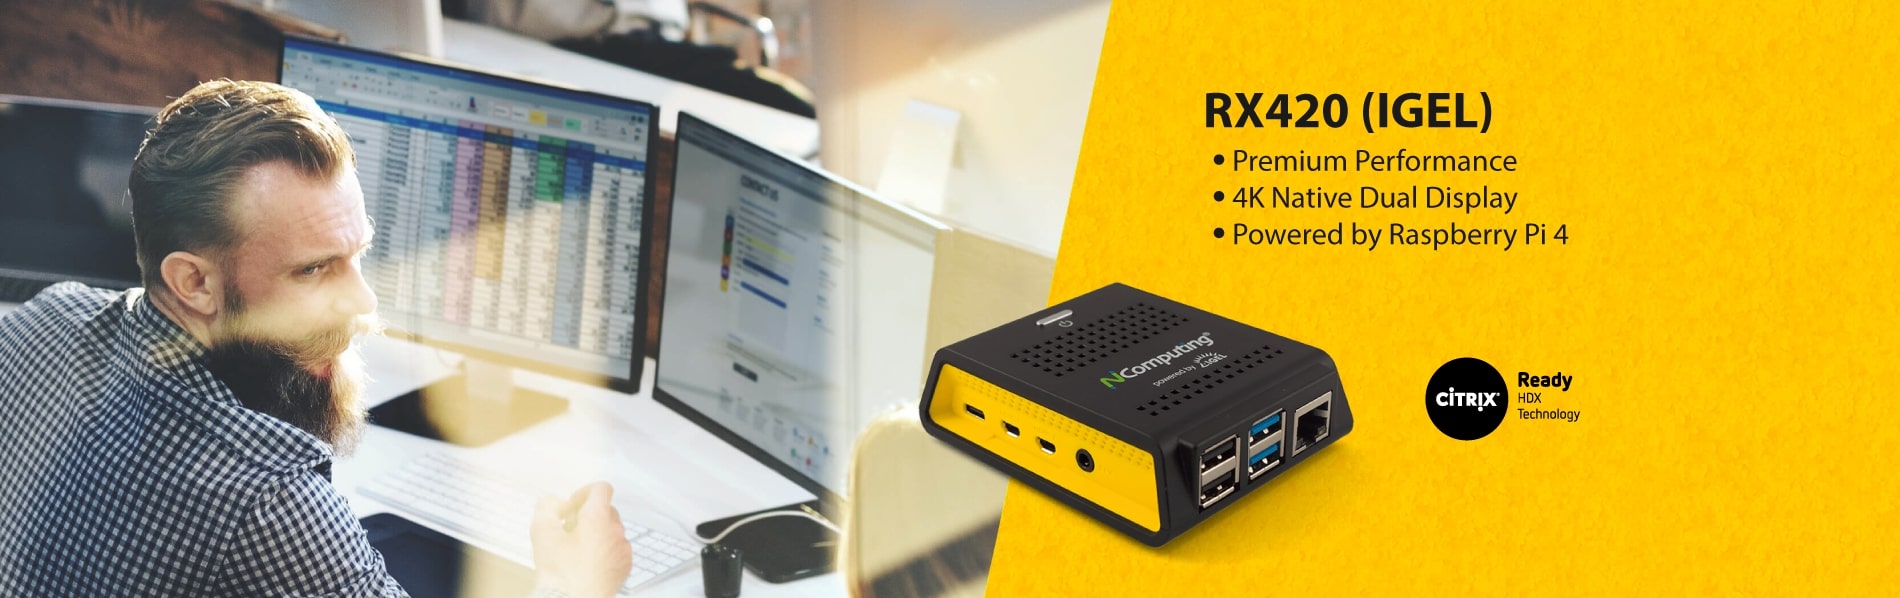 NComputing RX420(IGEL) product landing page banner